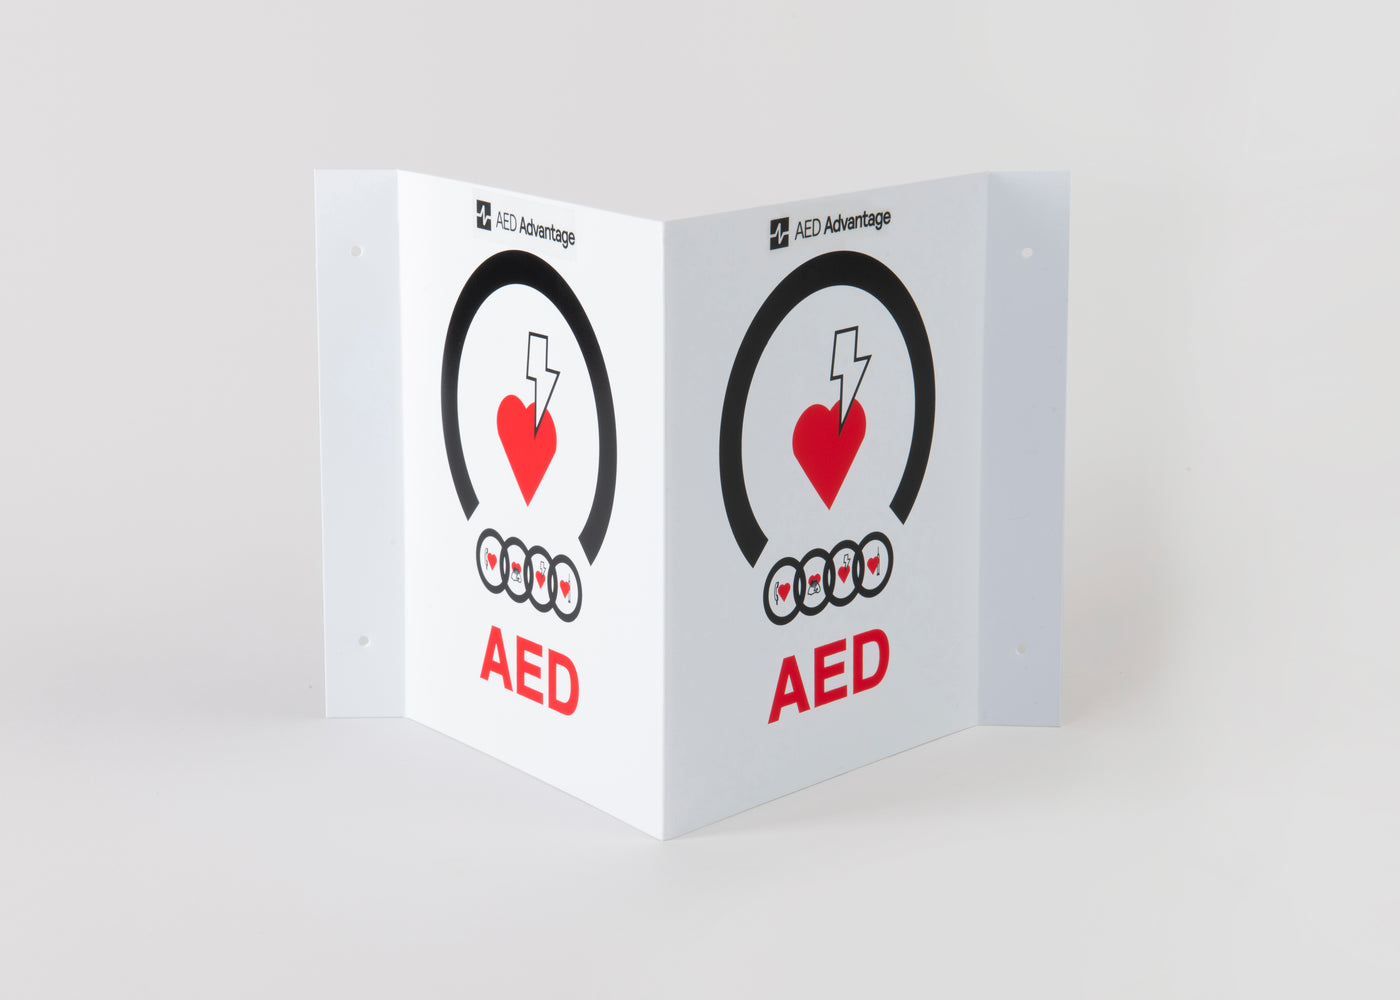 A tent-shaped 3D plastic wall sign that marks an AED is present to individuals approaching from any direction